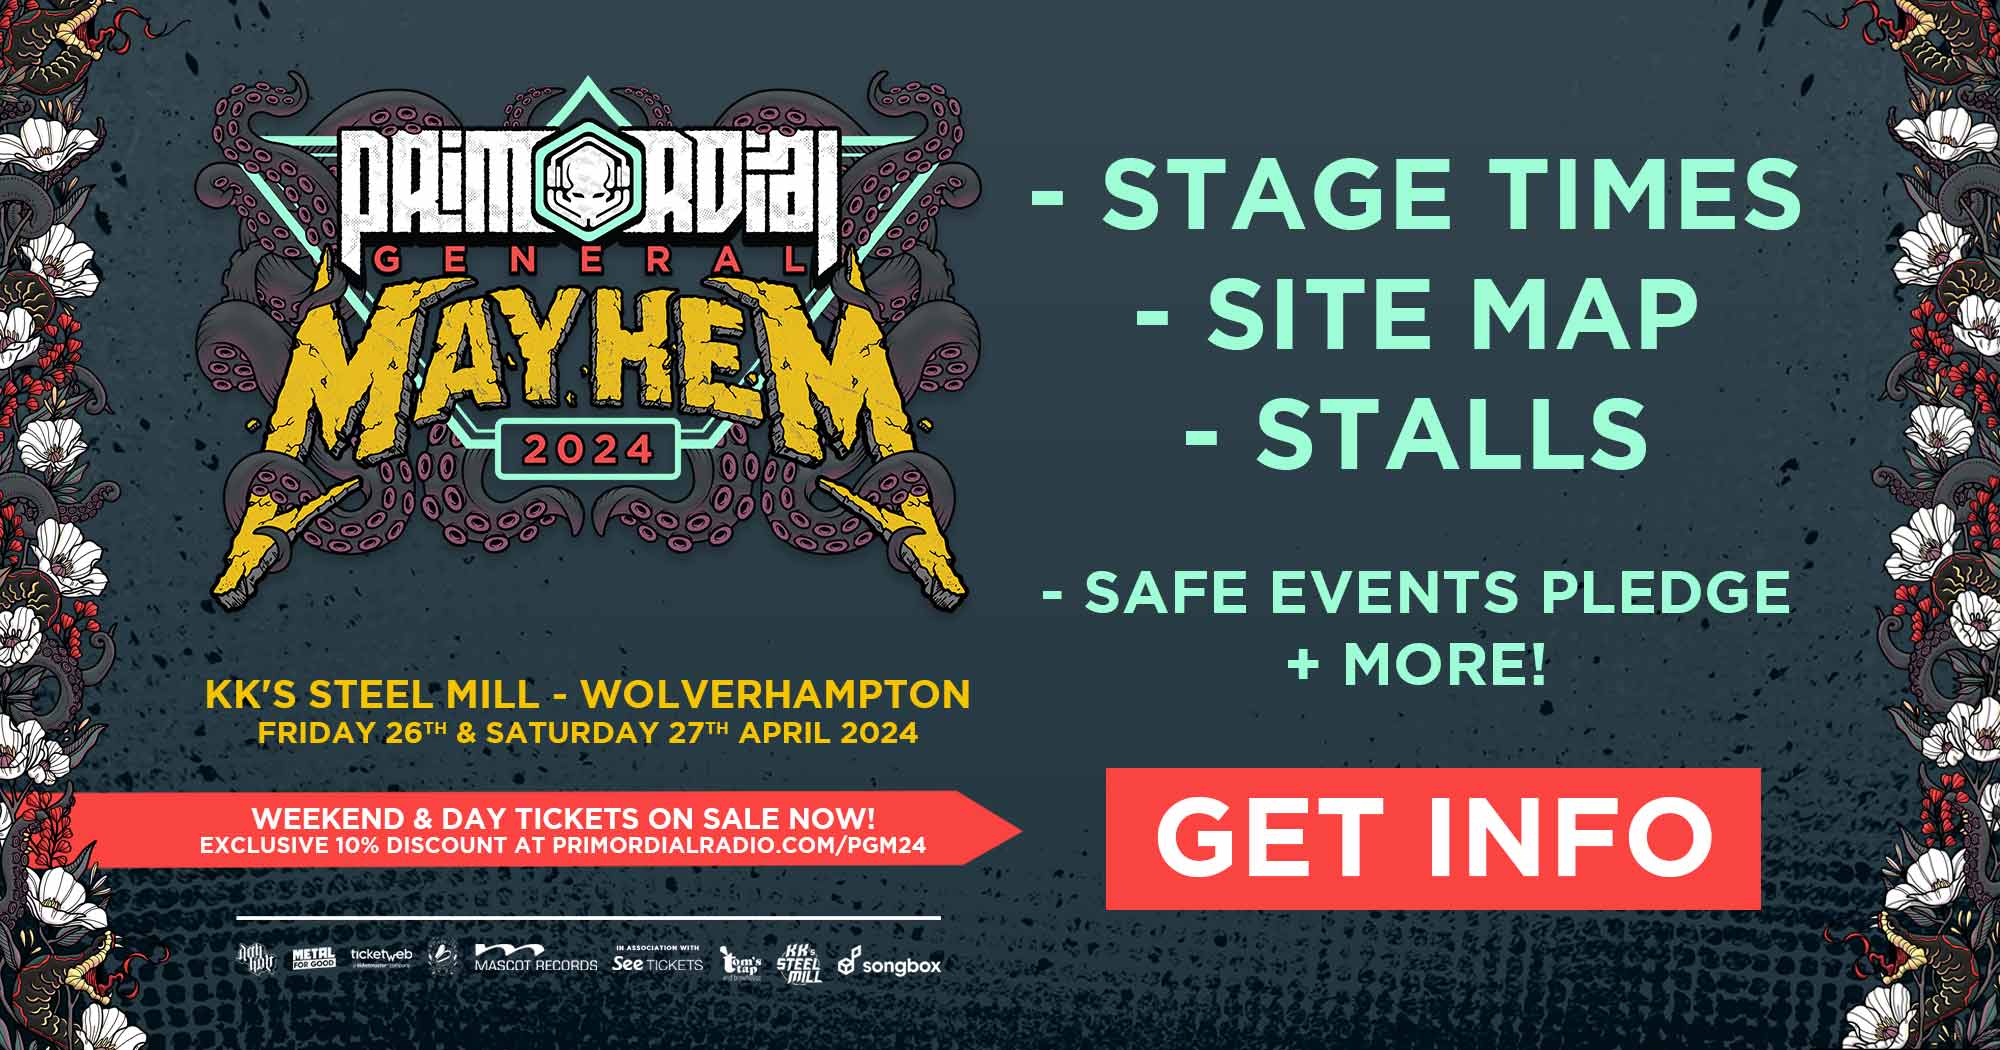 Primordial General Mayhem 2024 – Stage Times, Site Map, Stalls and more!